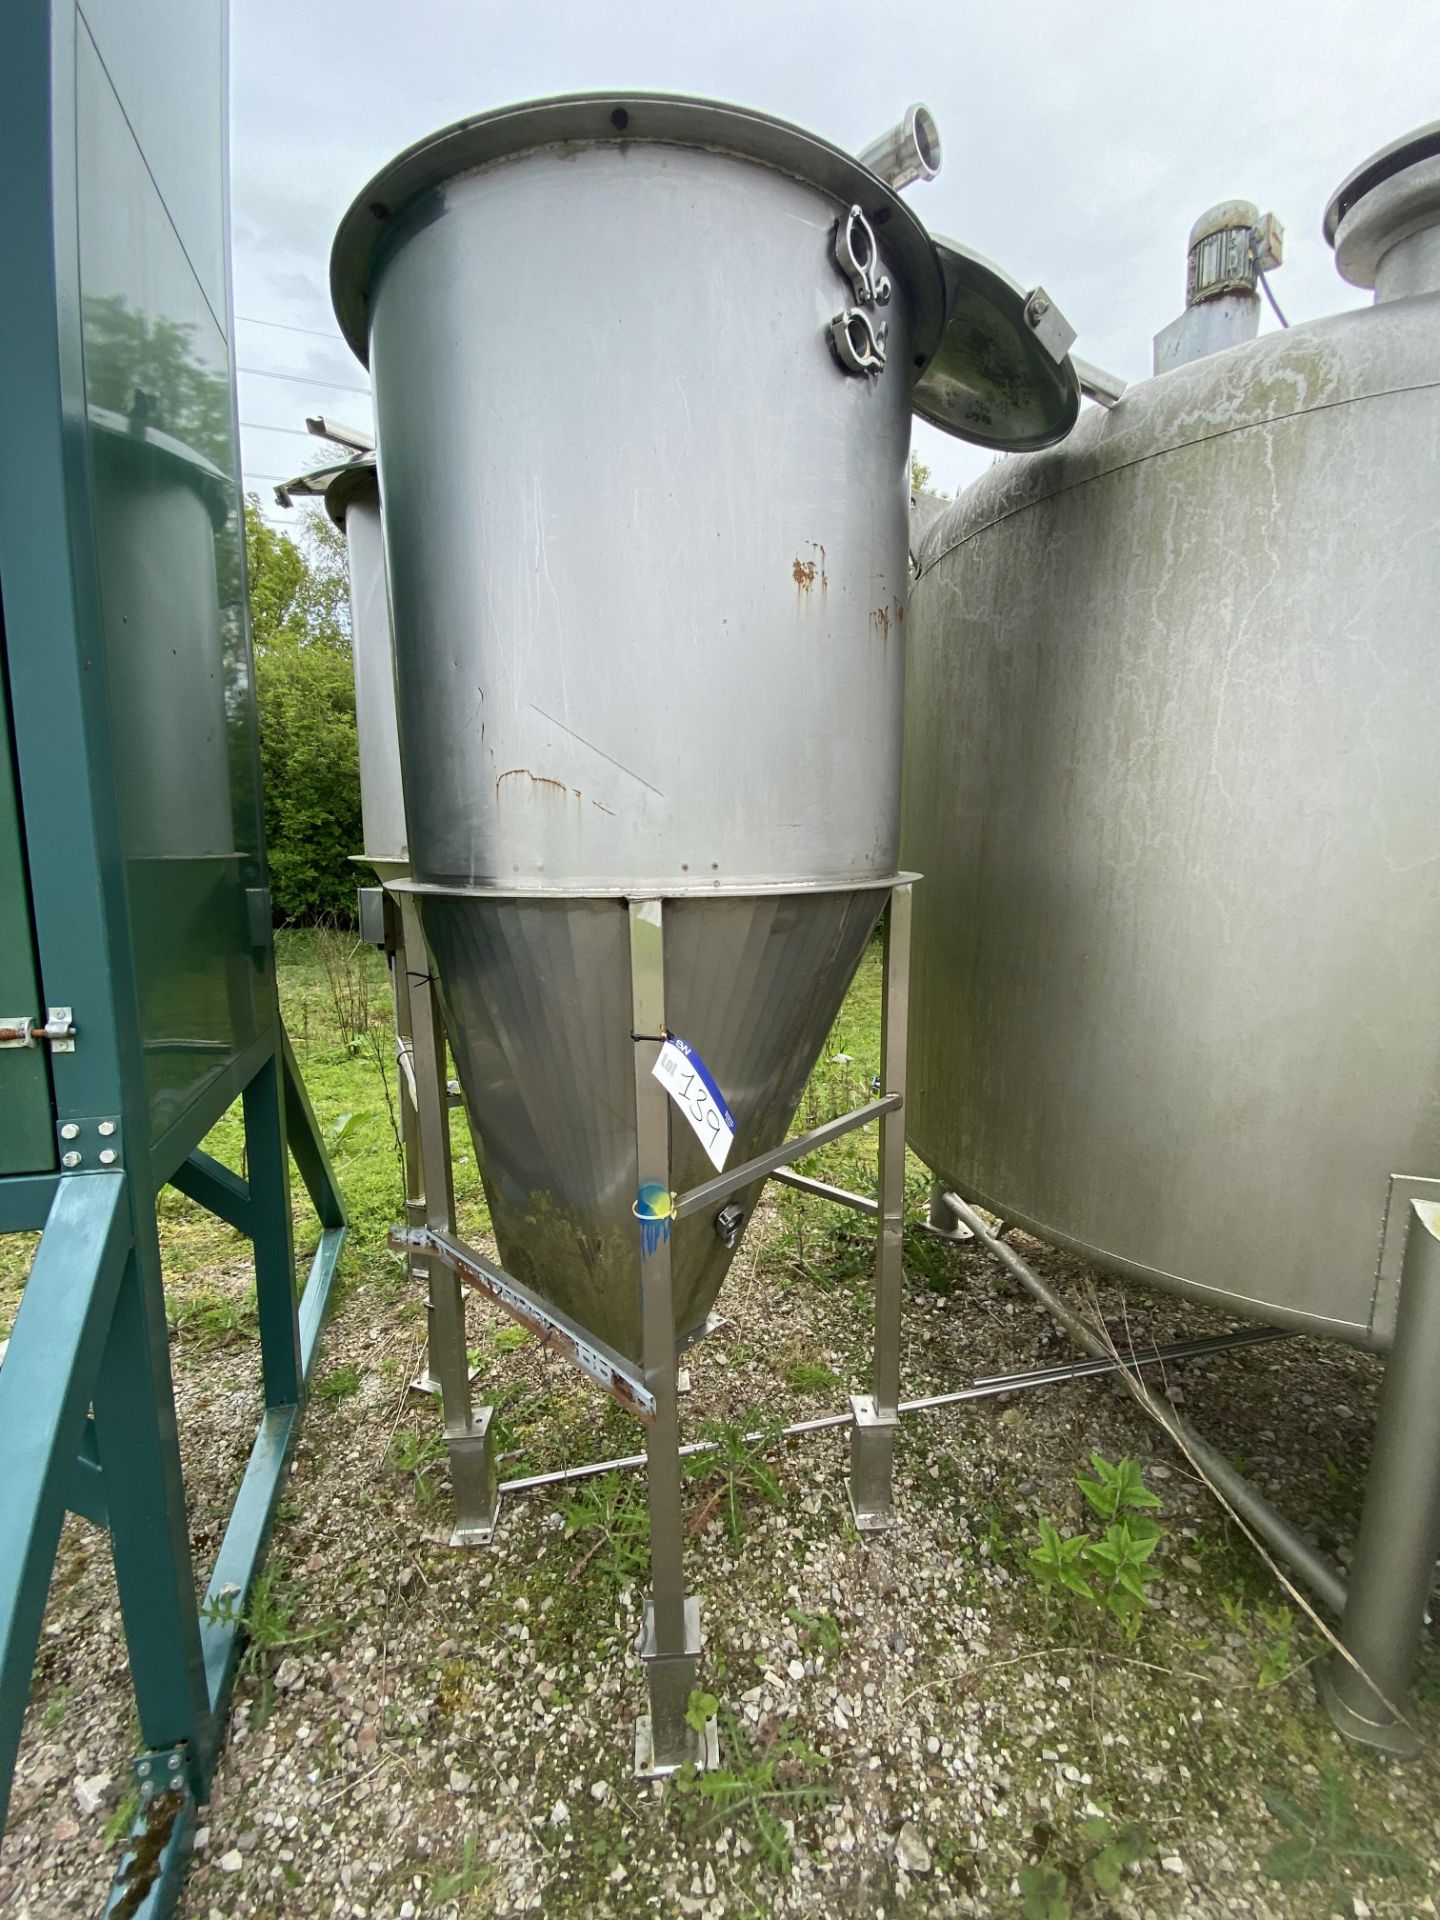 Stainless Steel Tank/ Hopper, approx. 2.5m x 1m dia., on stainless steel fabricated legs. lot